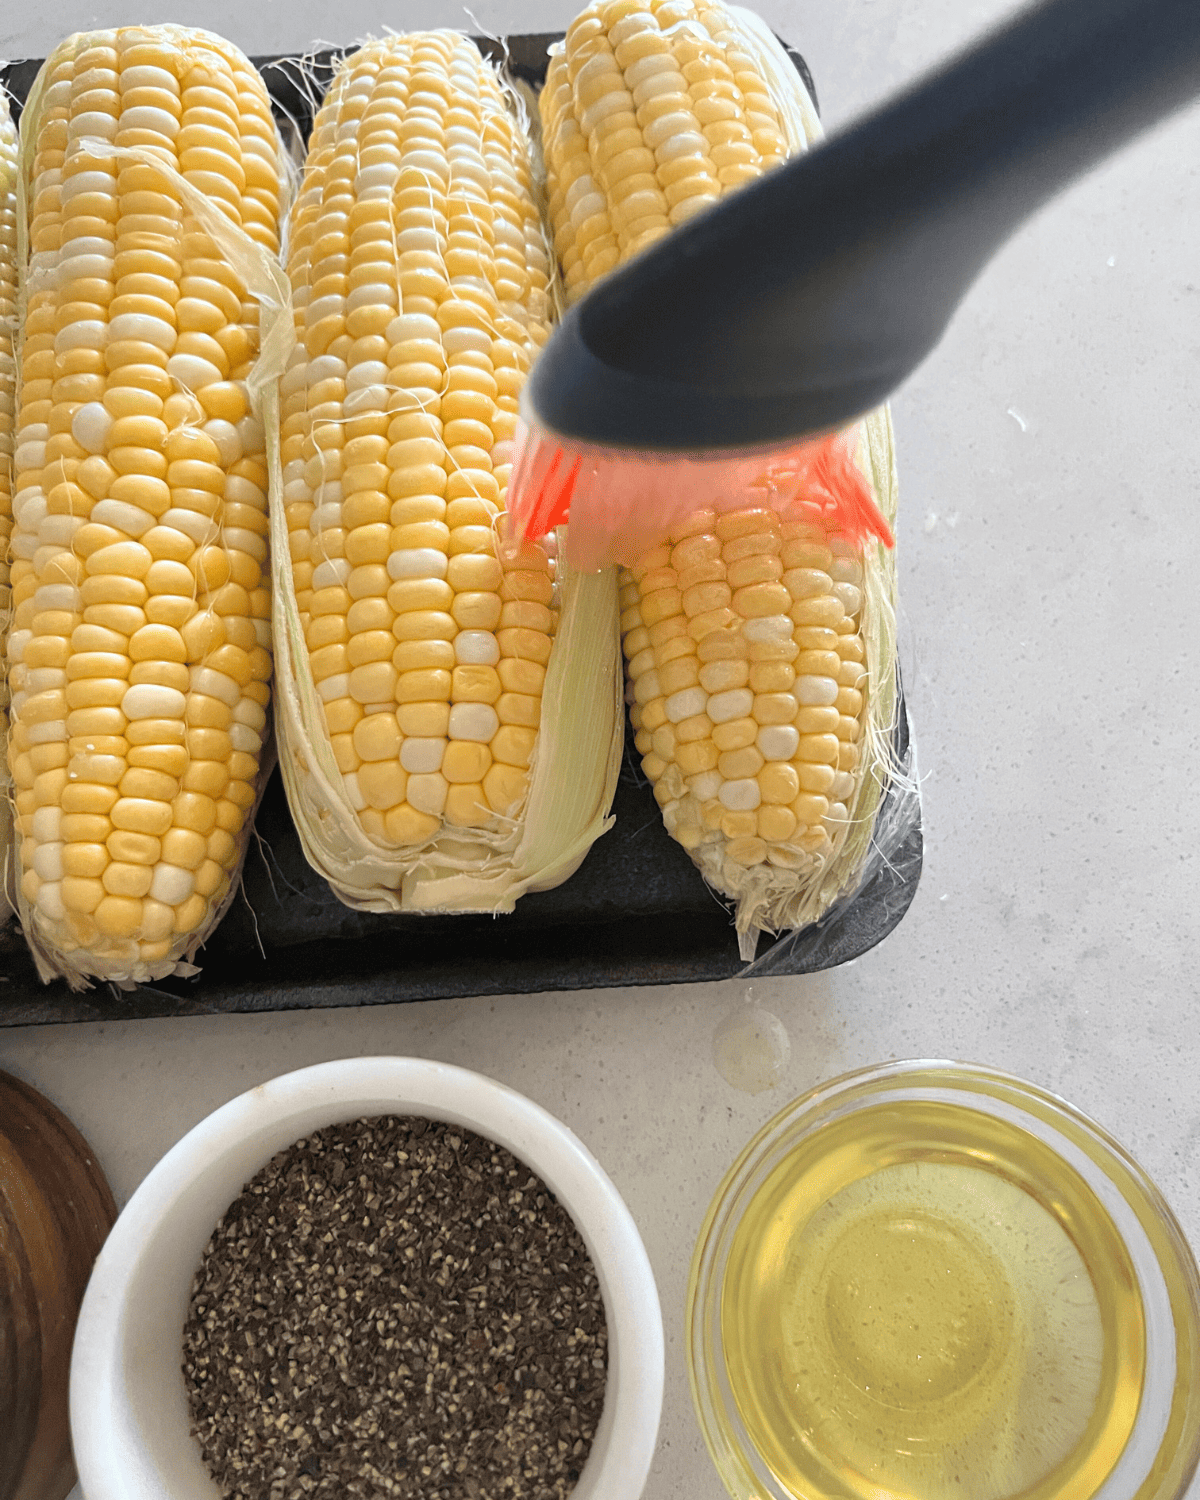 brushed olive oil on corn on the cob with seasonings.